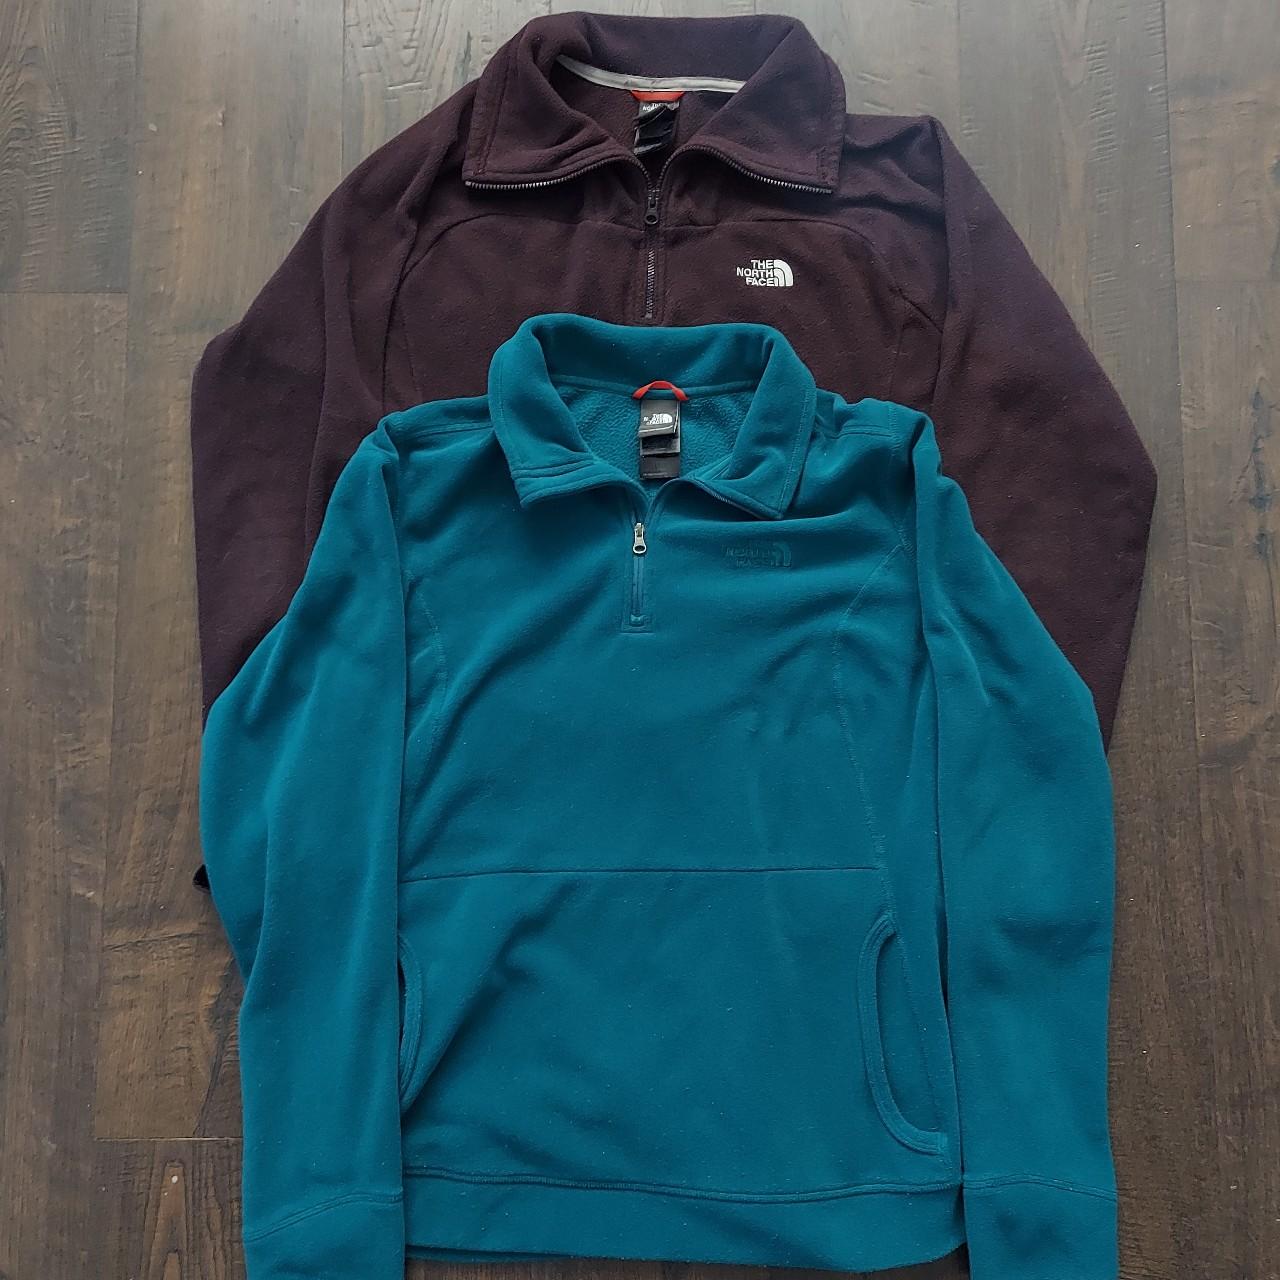 The North Face Women's Blue and Purple